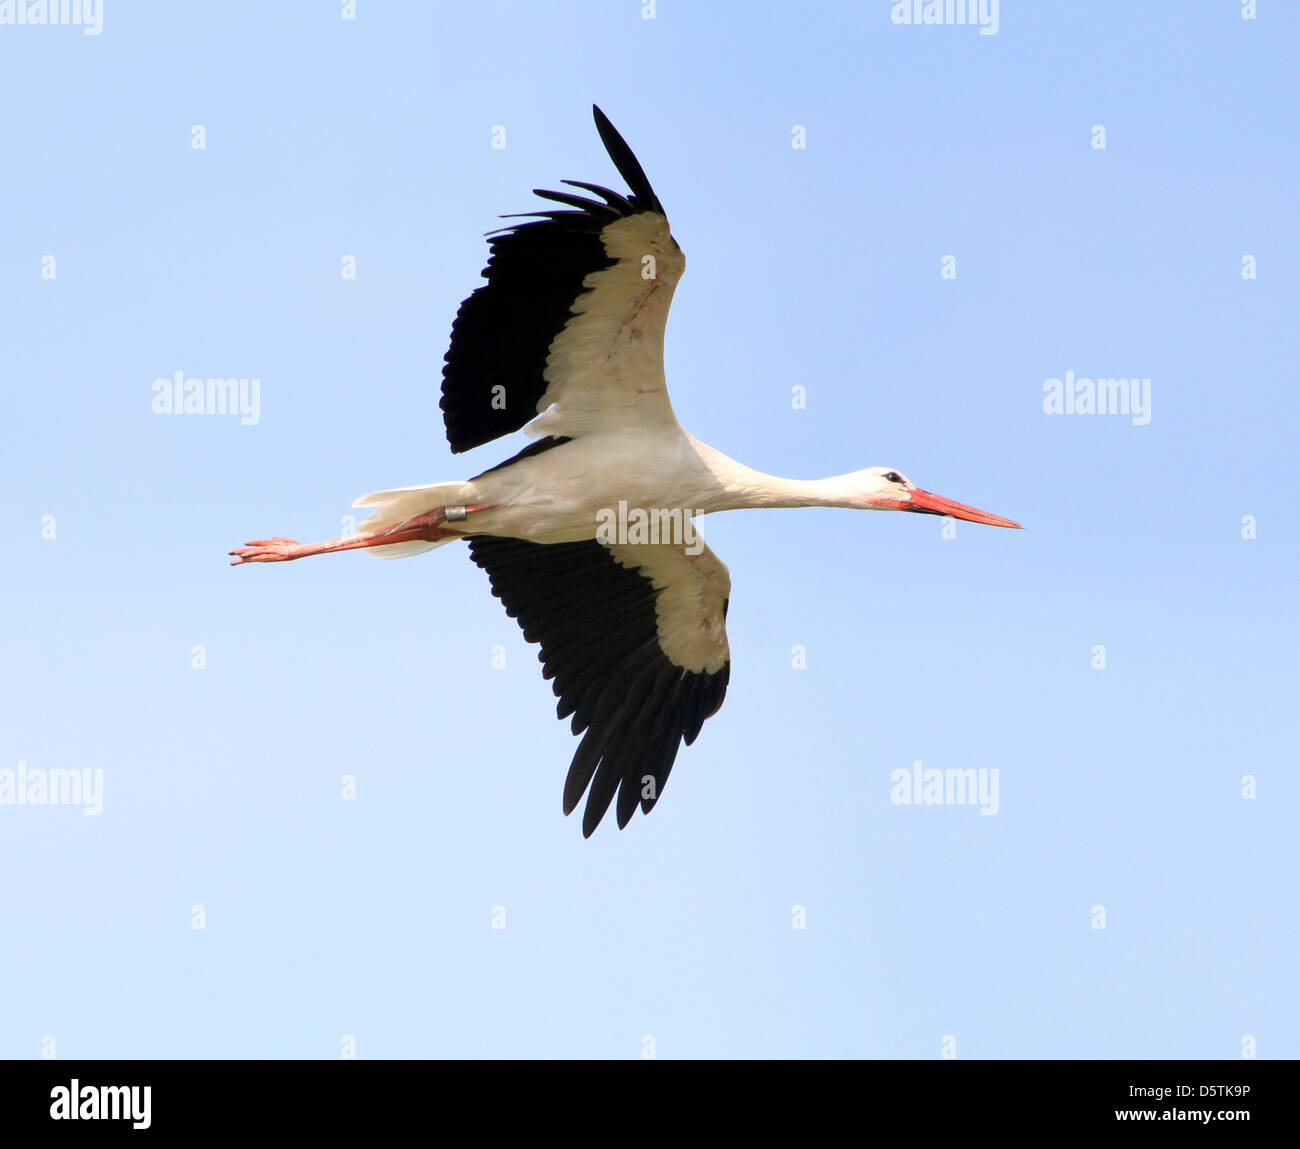 White Stork (Ciconia ciconia) in  flight against a blue sky (dozens of images in series) Stock Photo